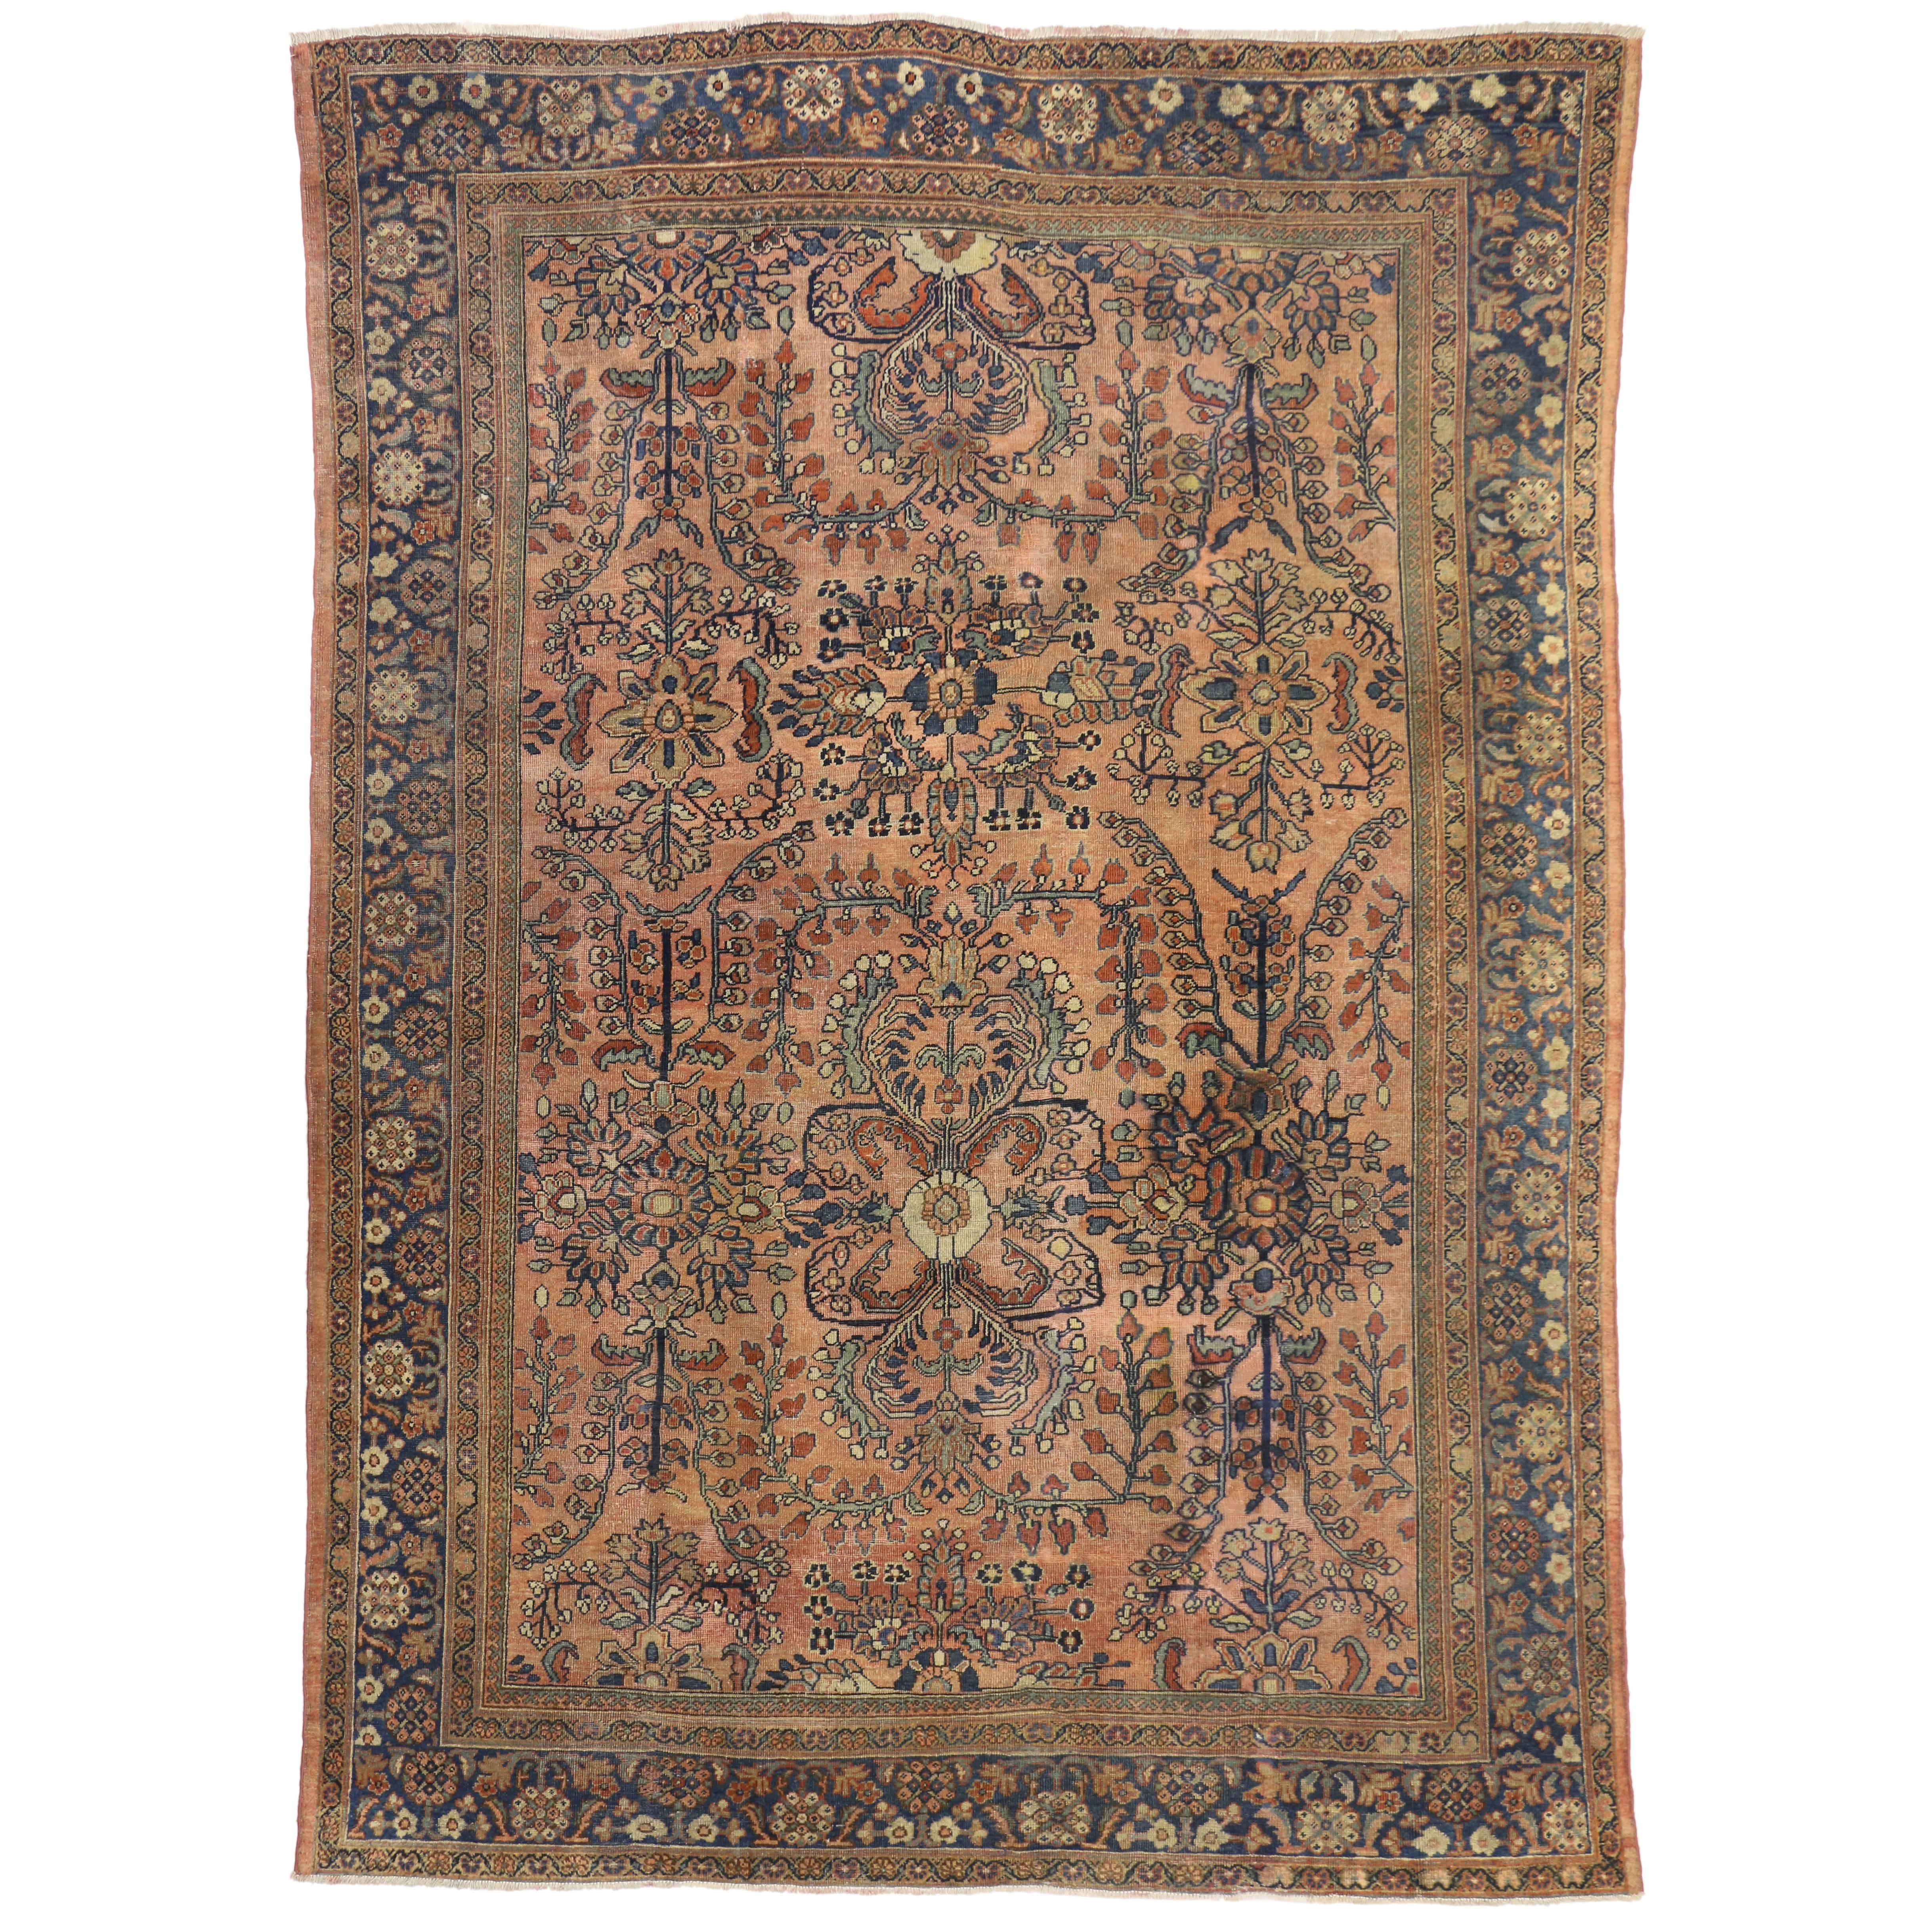 Antique Persian Lilihan Rug with Rustic Victorian Style